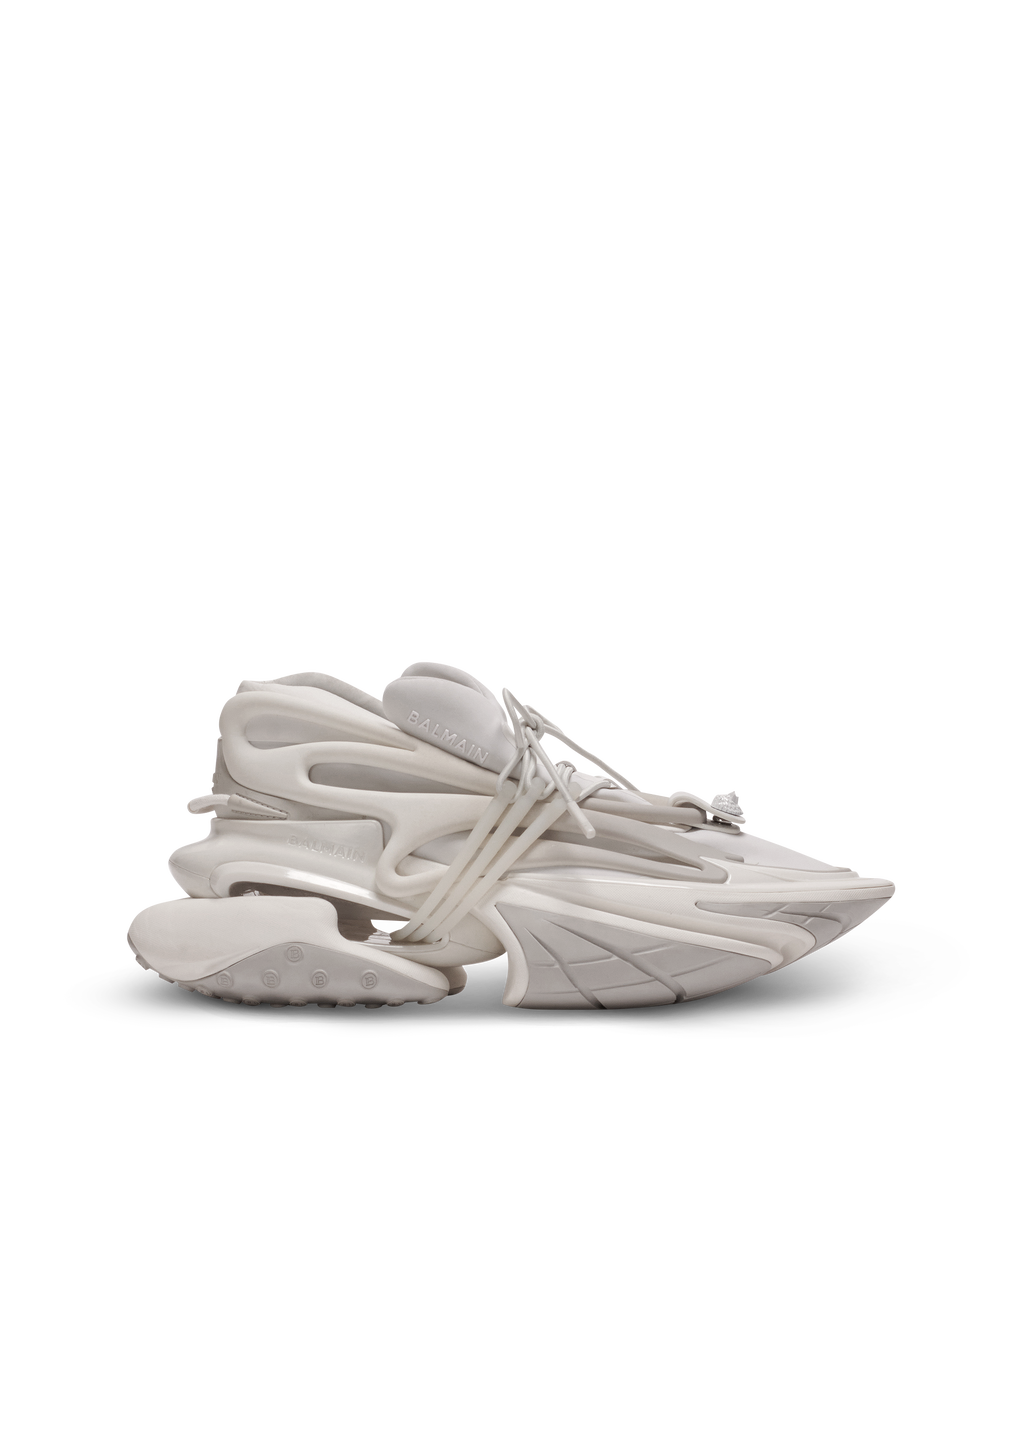 Neoprene and leather Unicorn low-top sneakers, white, hi-res